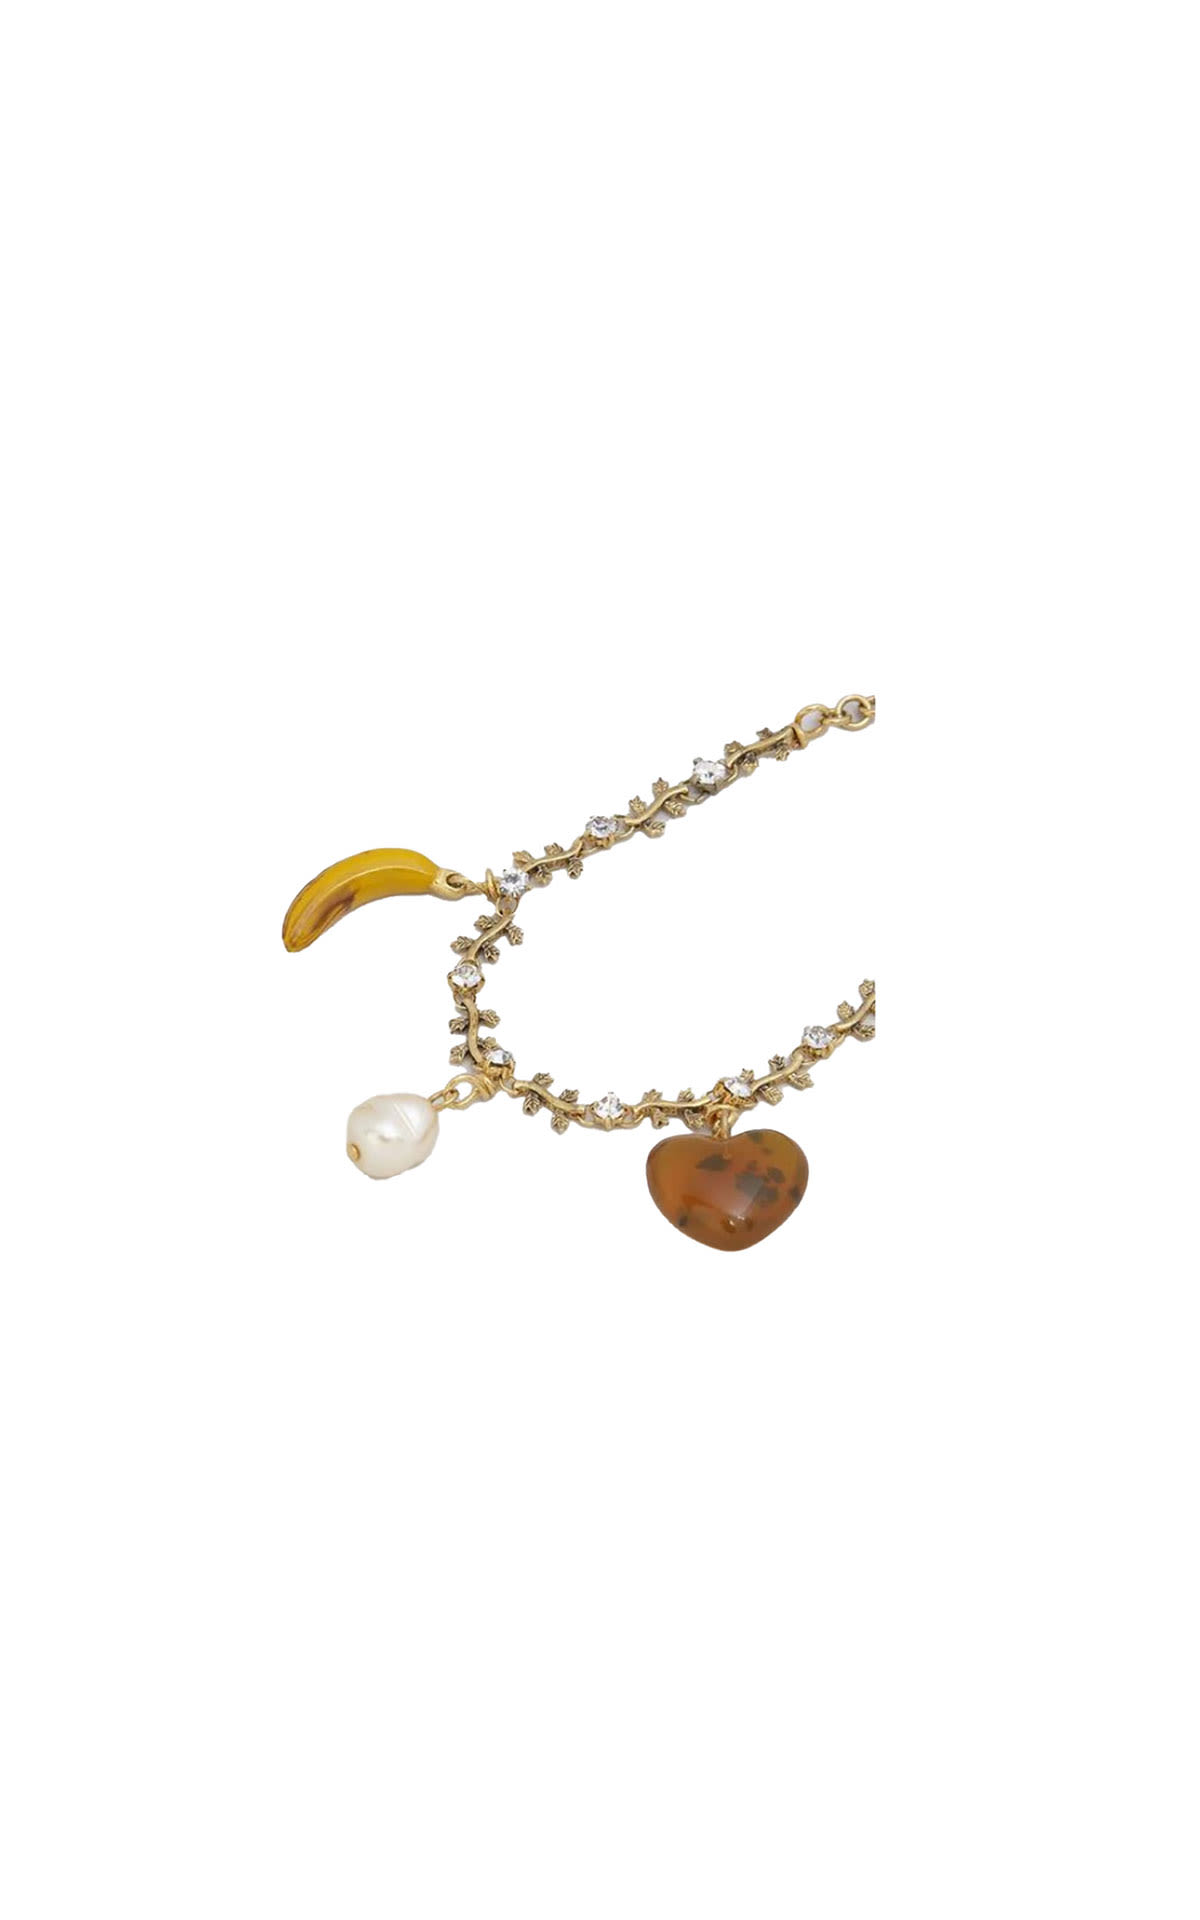 Marni Banana and heart bracelet from Bicester Village